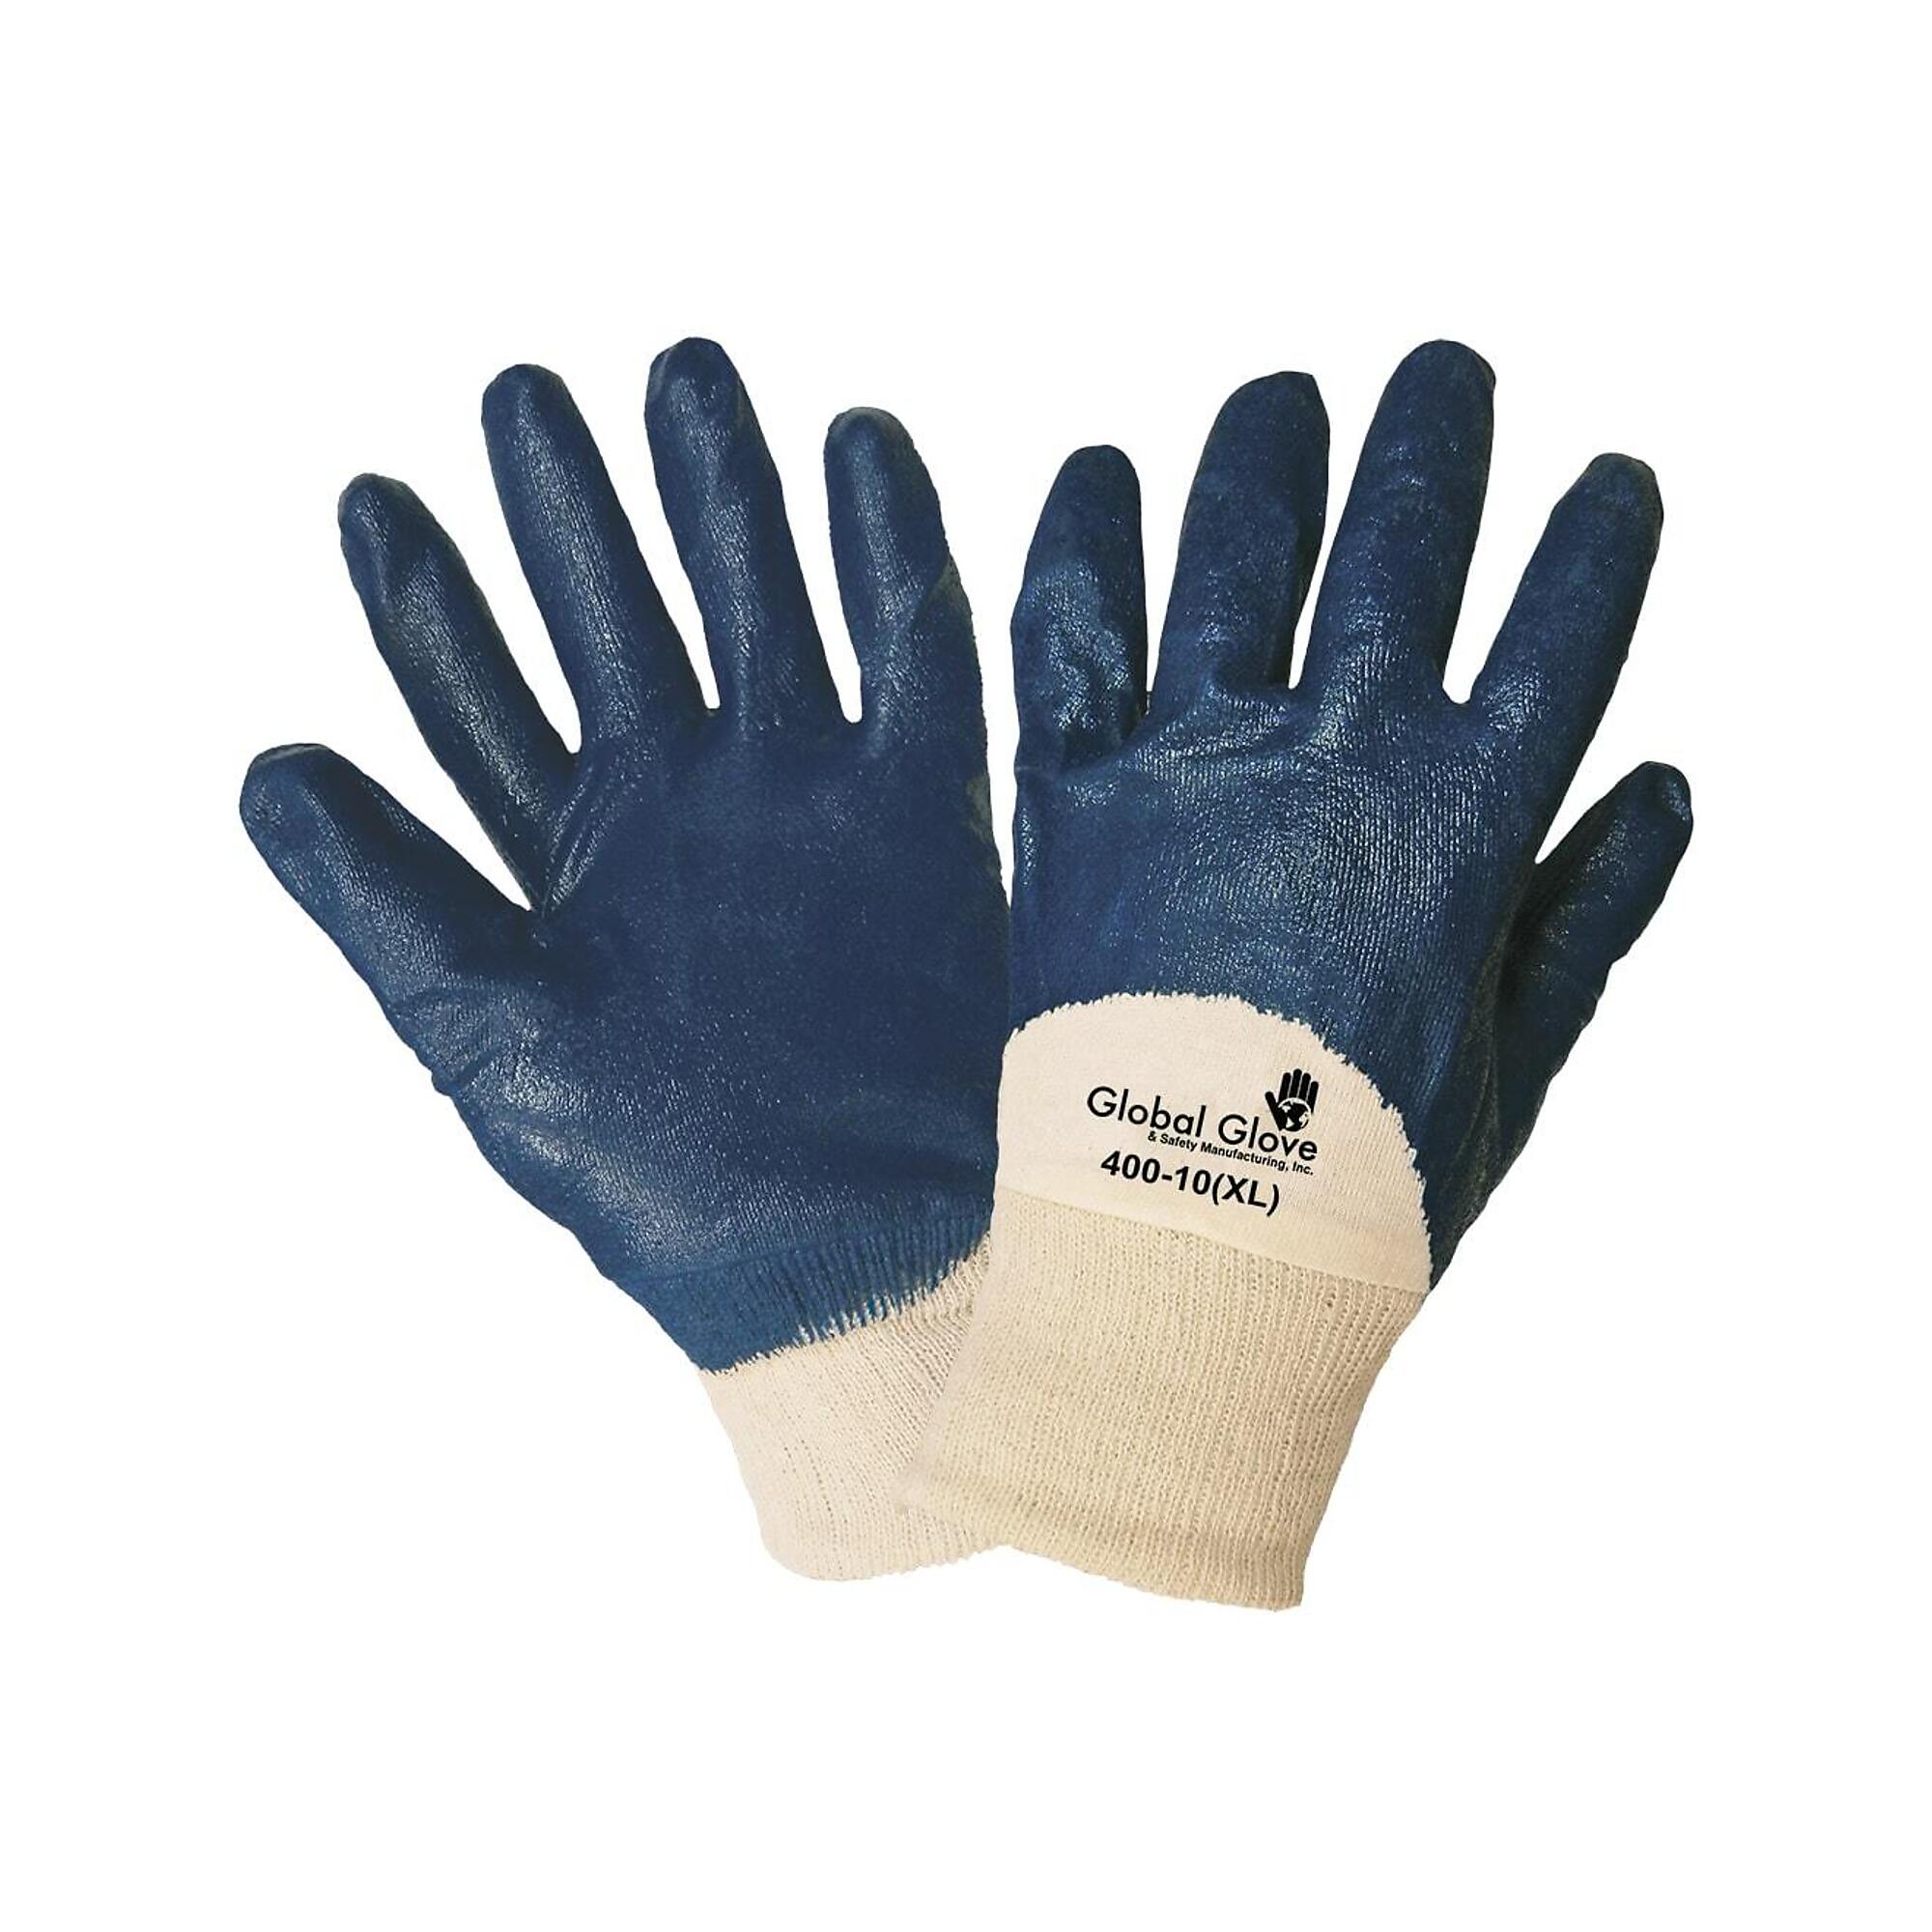 Global Glove, 2-Pc Interlock Shell, Blue 3/4 Coat Nitrile Gloves- 12 Pairs, Size 2XL, Color Tan/Blue, Included (qty.) 12 Model 400-10(2XL)